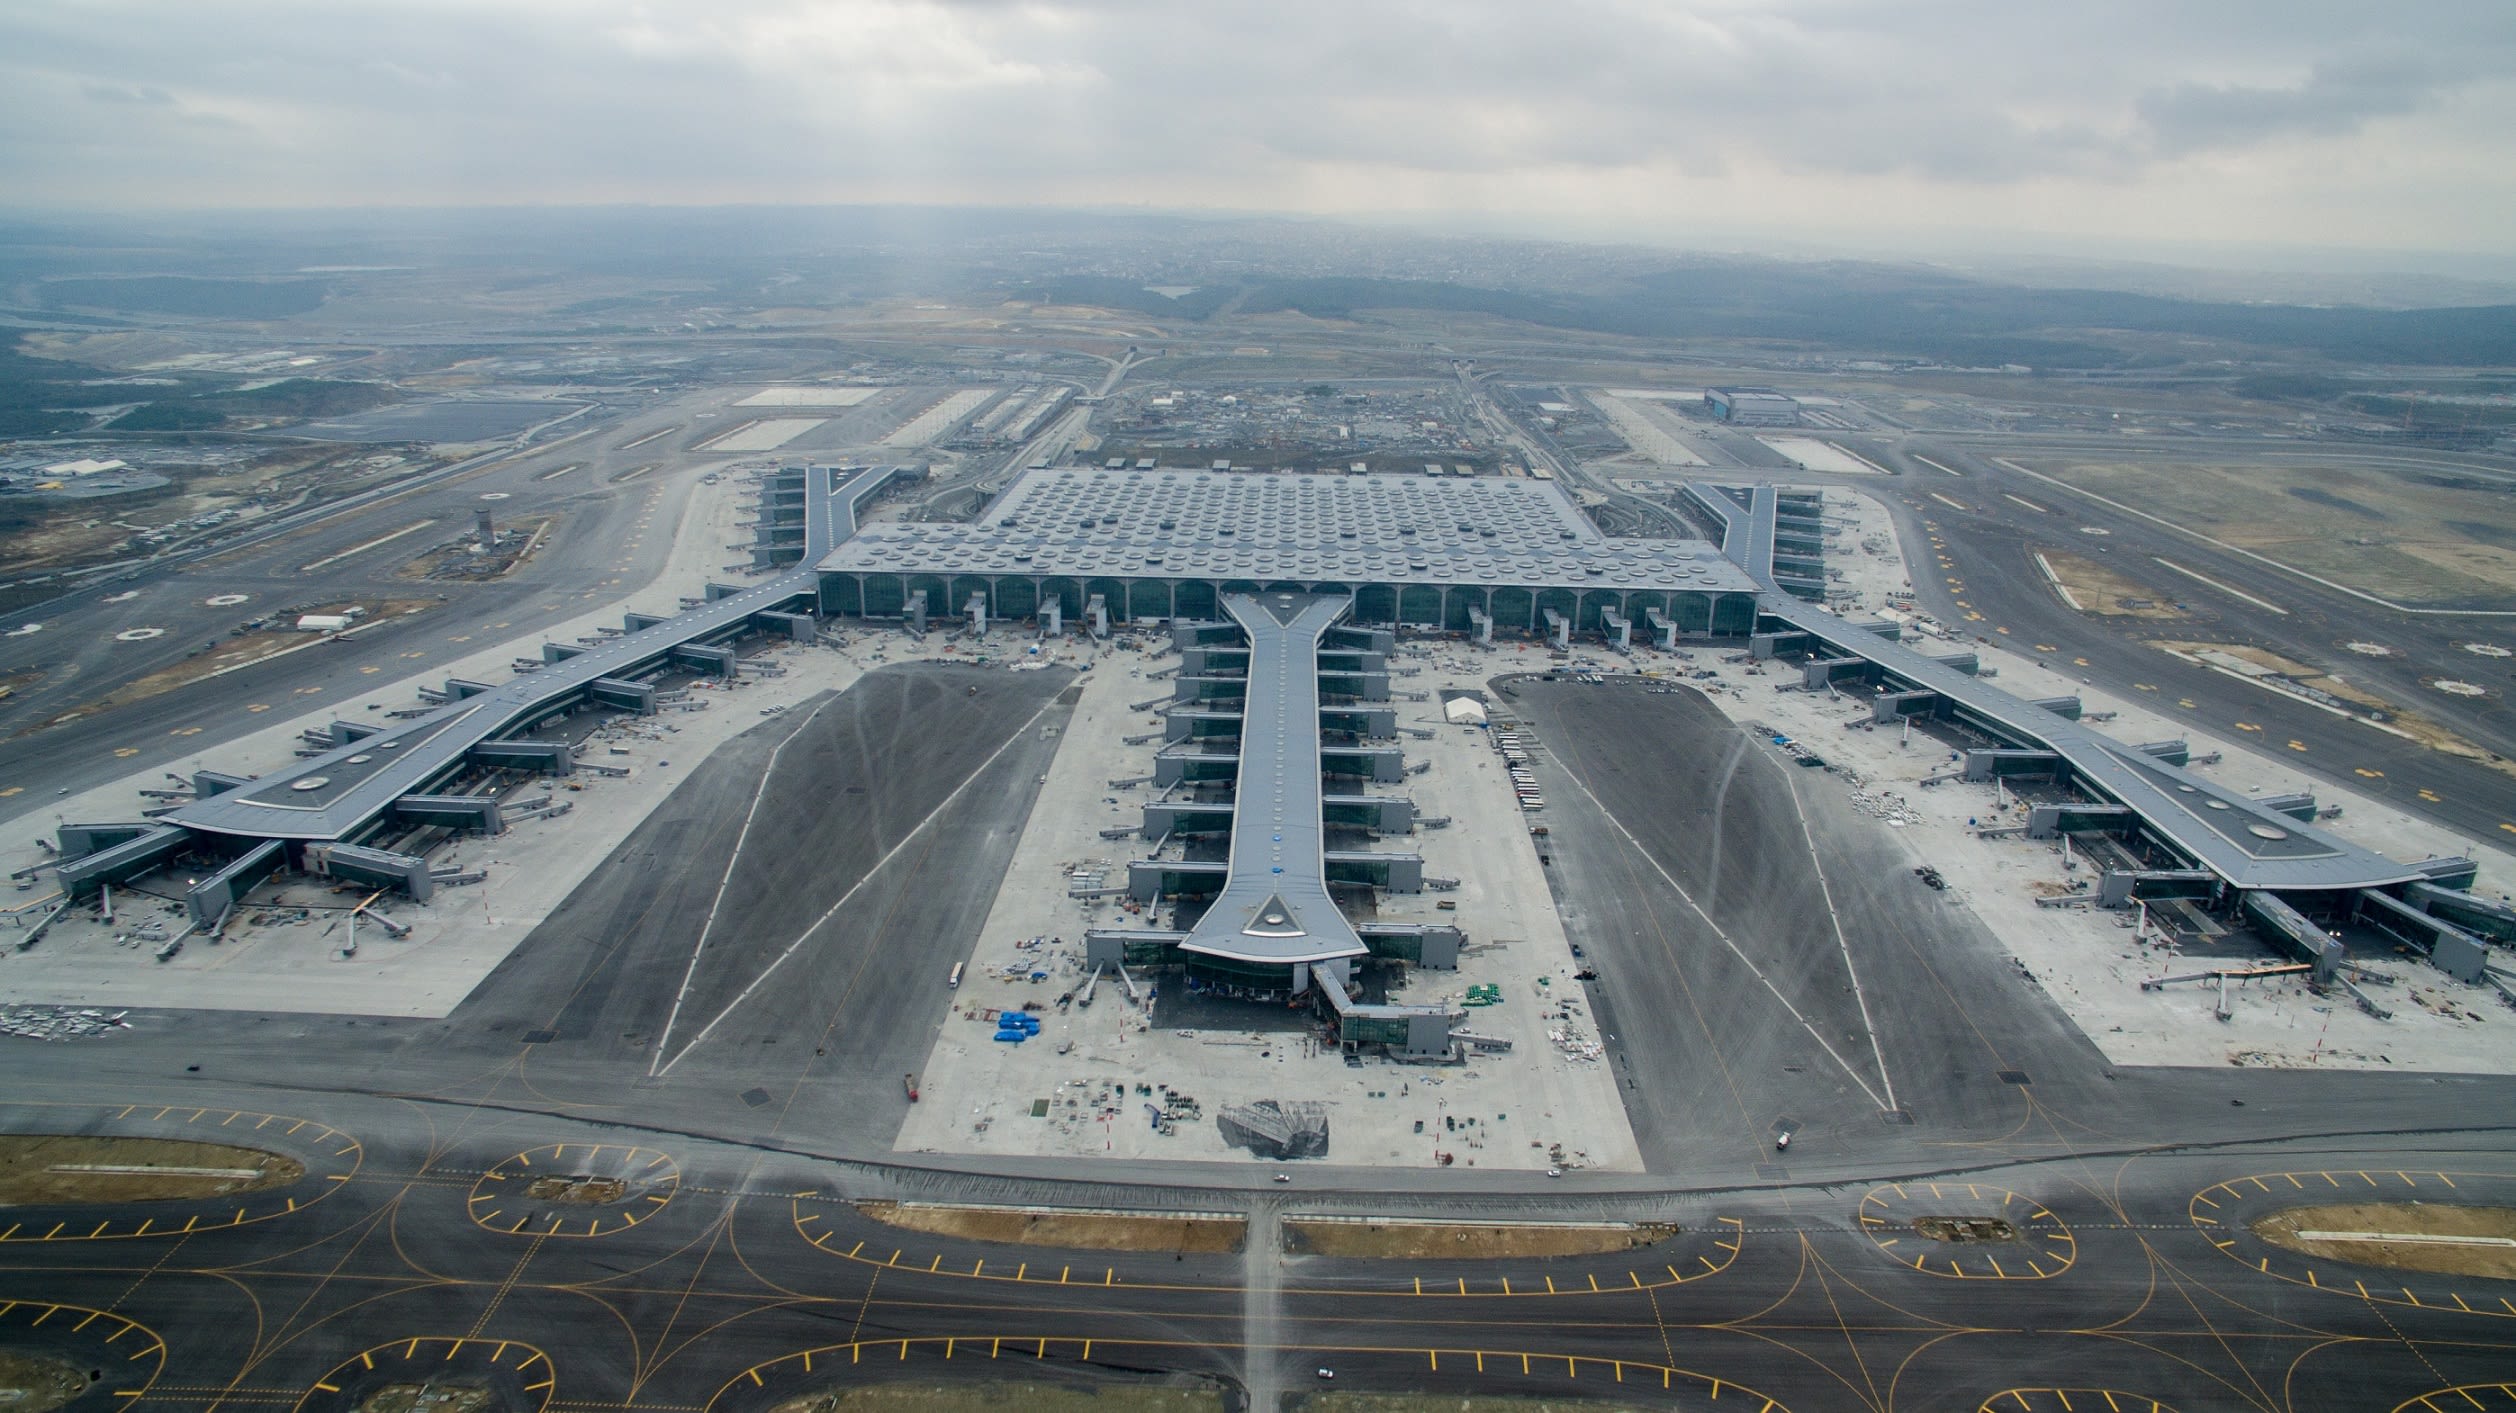 Istanbul New Airport in Turkey aims to be one of world's largest